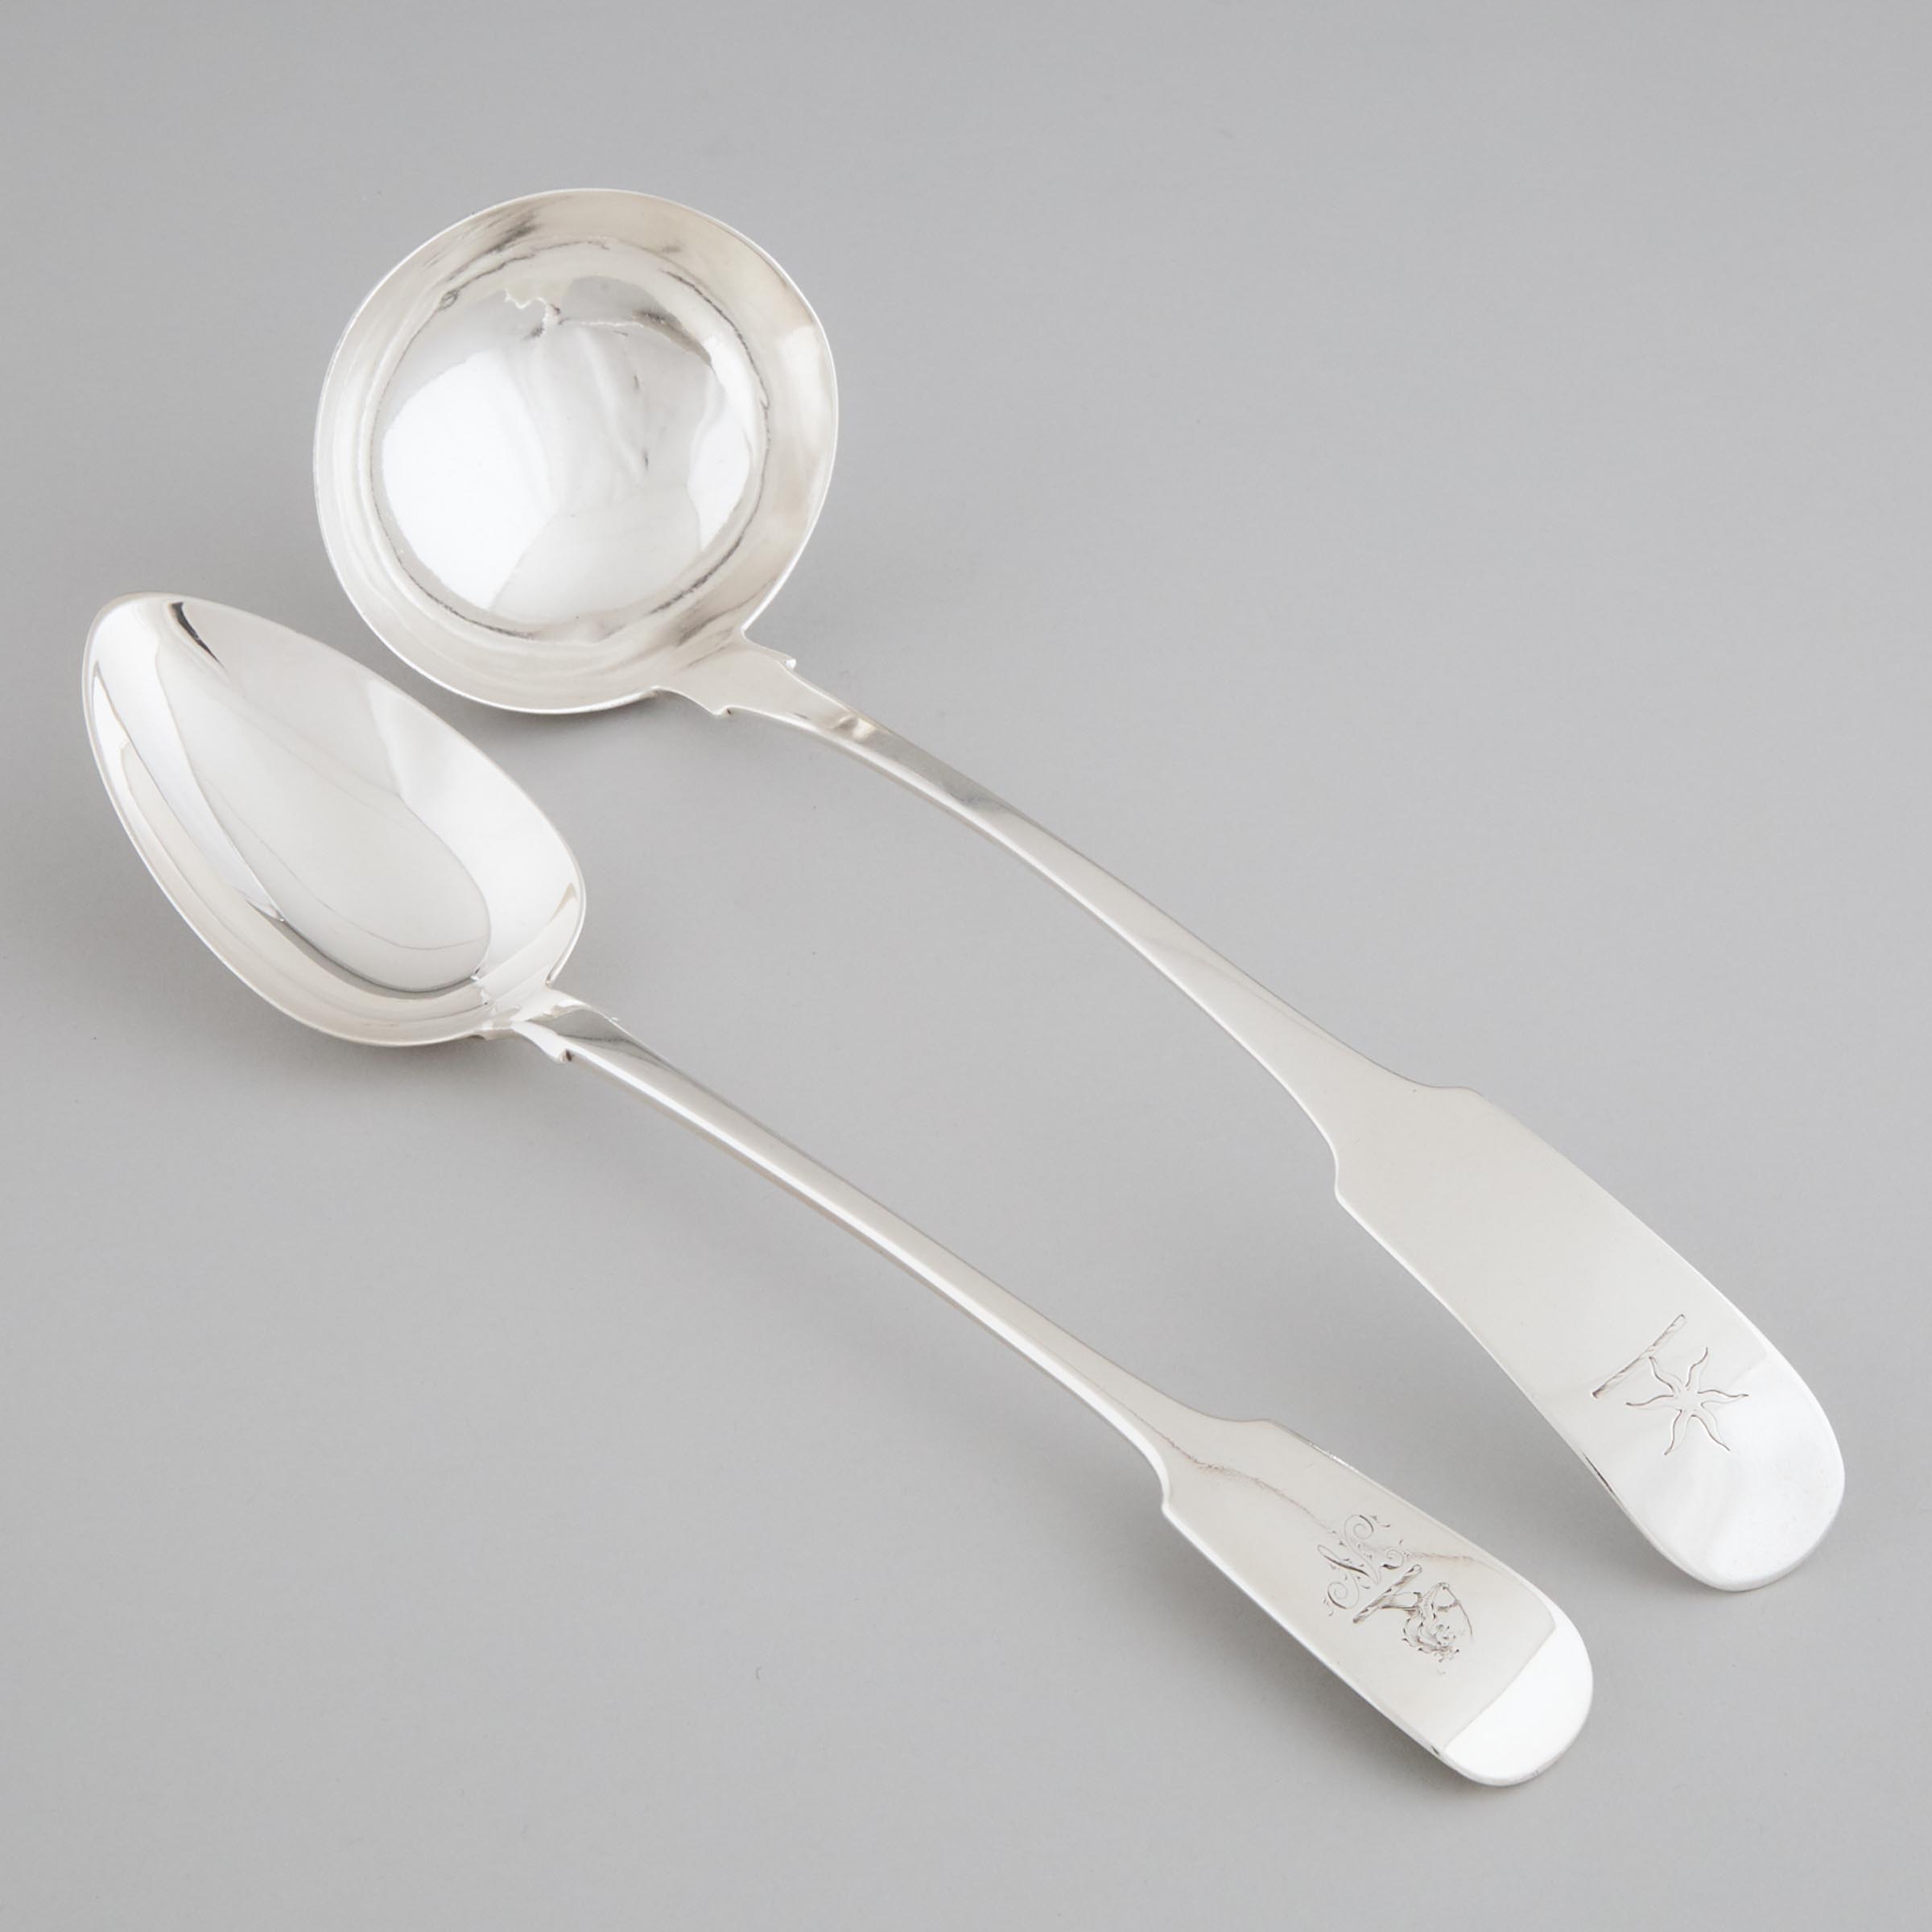 George III Irish Silver Fiddle Pattern Soup Ladle and Serving Spoon, Thomas Townsend and Philip Weekes, Dublin, 1809/11